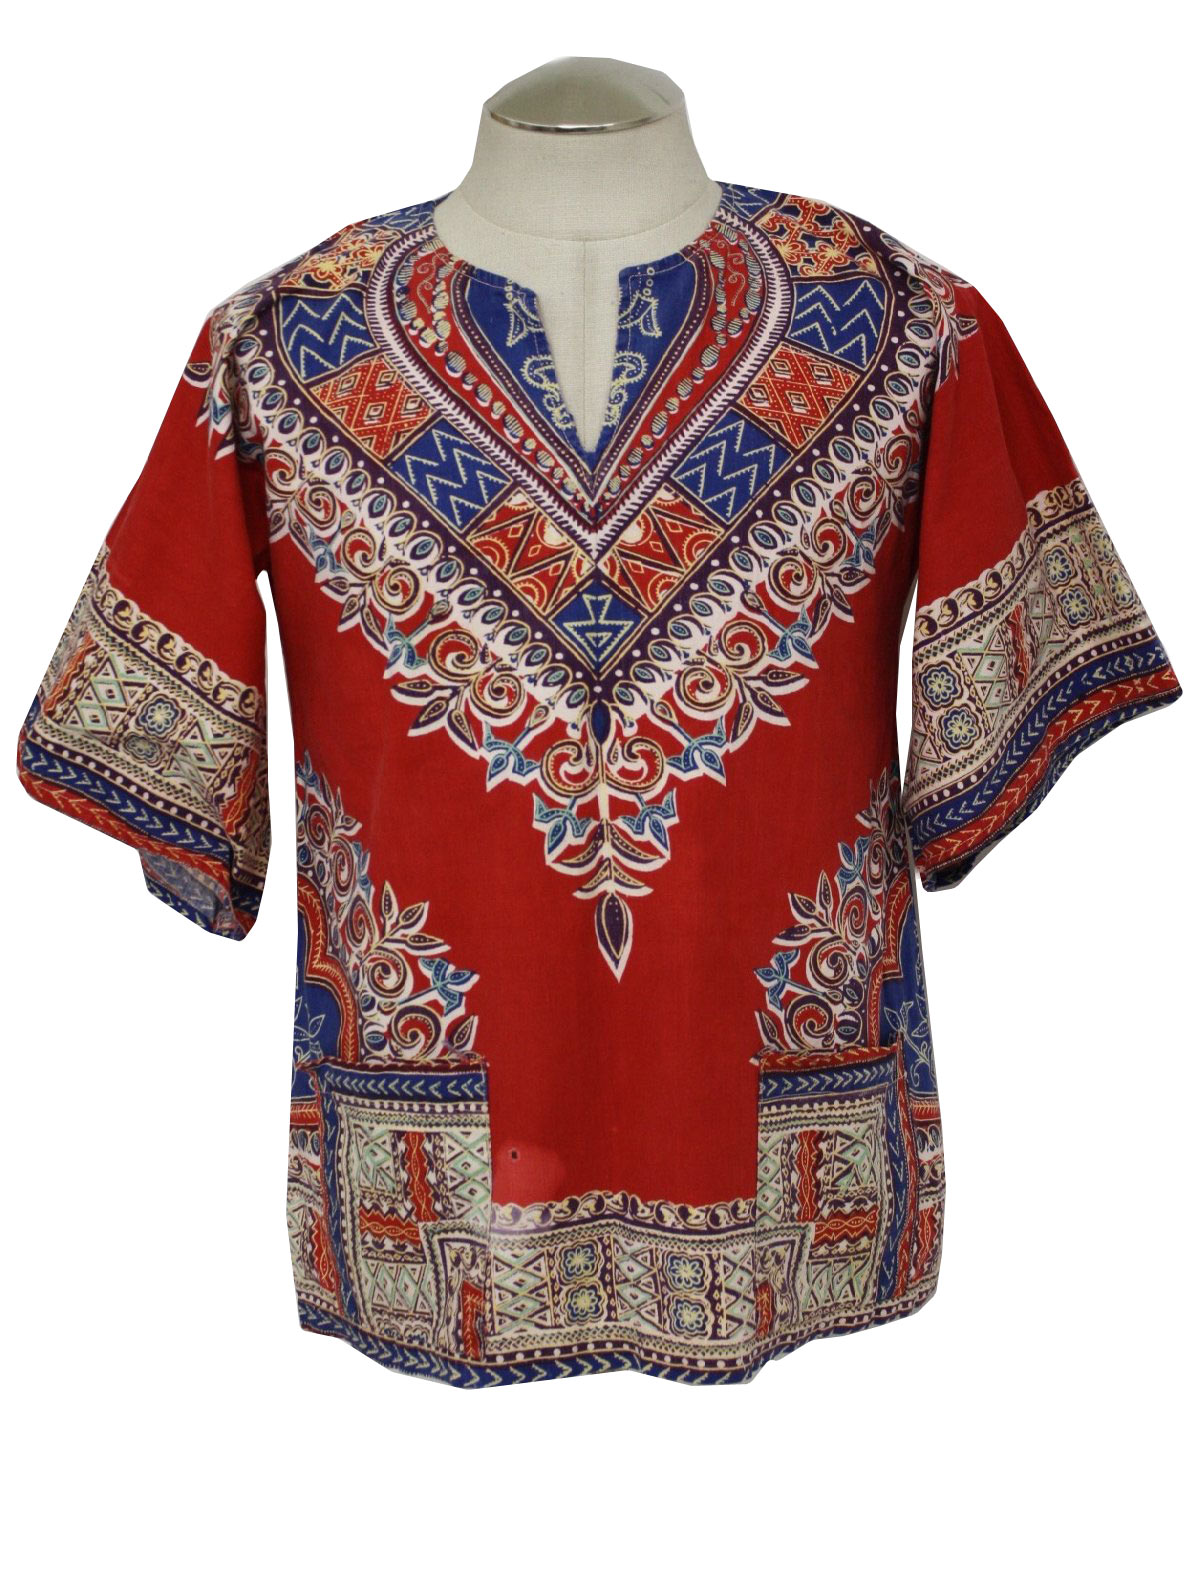 1970s Dashiki Shirt: 70d -no label- Unisex red with blue, green purple ...